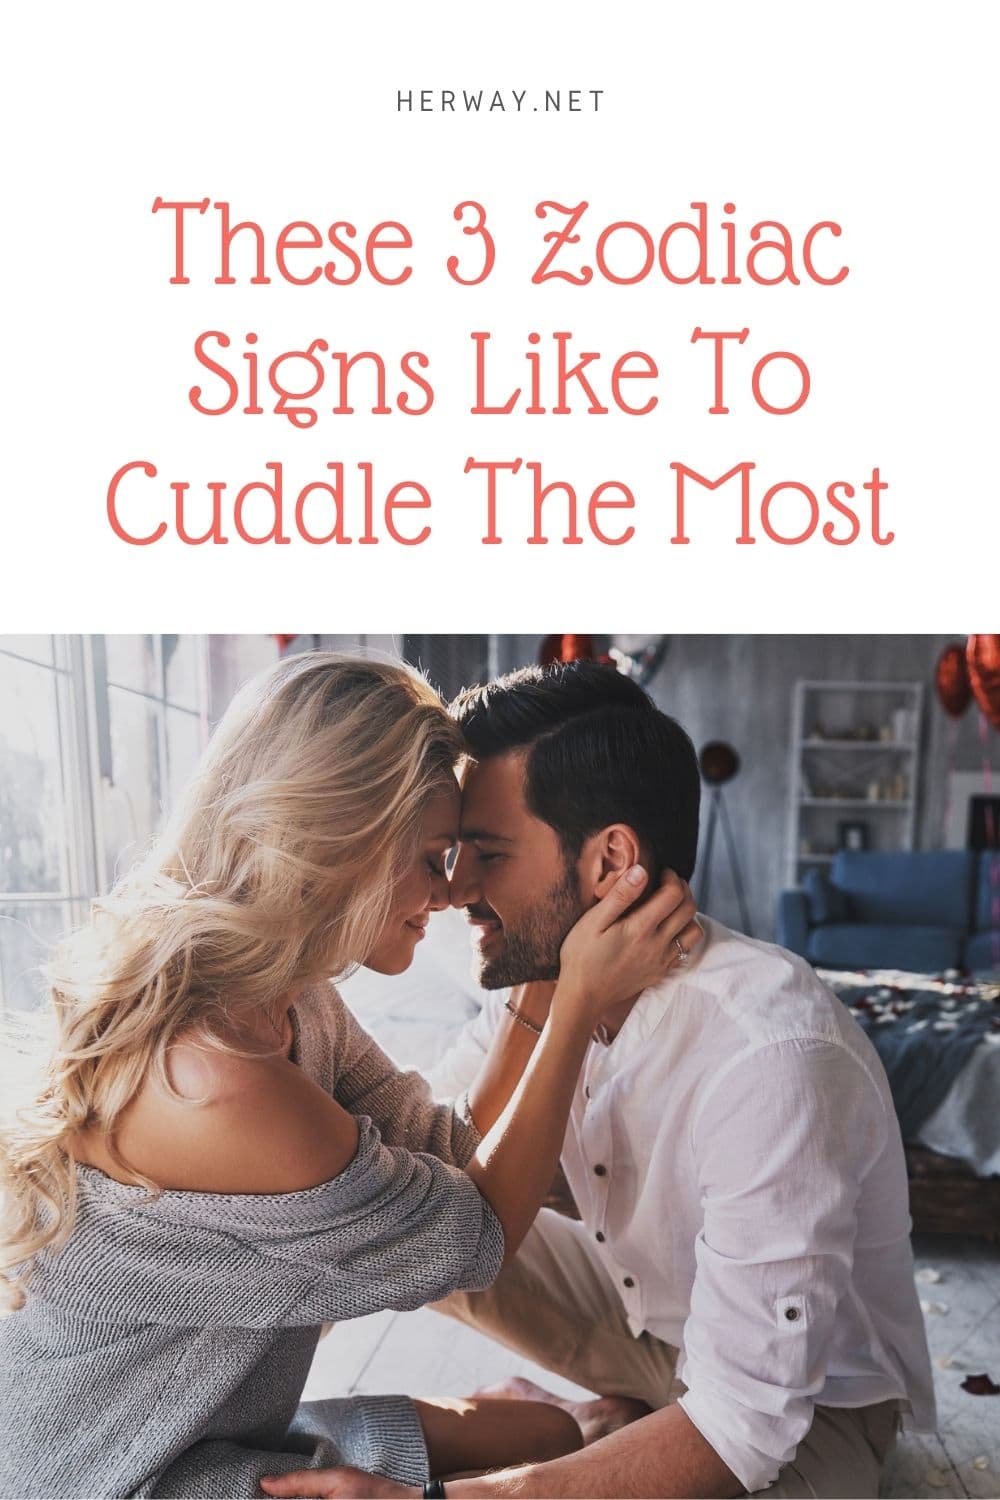 These 3 Zodiac Signs Like To Cuddle The Most